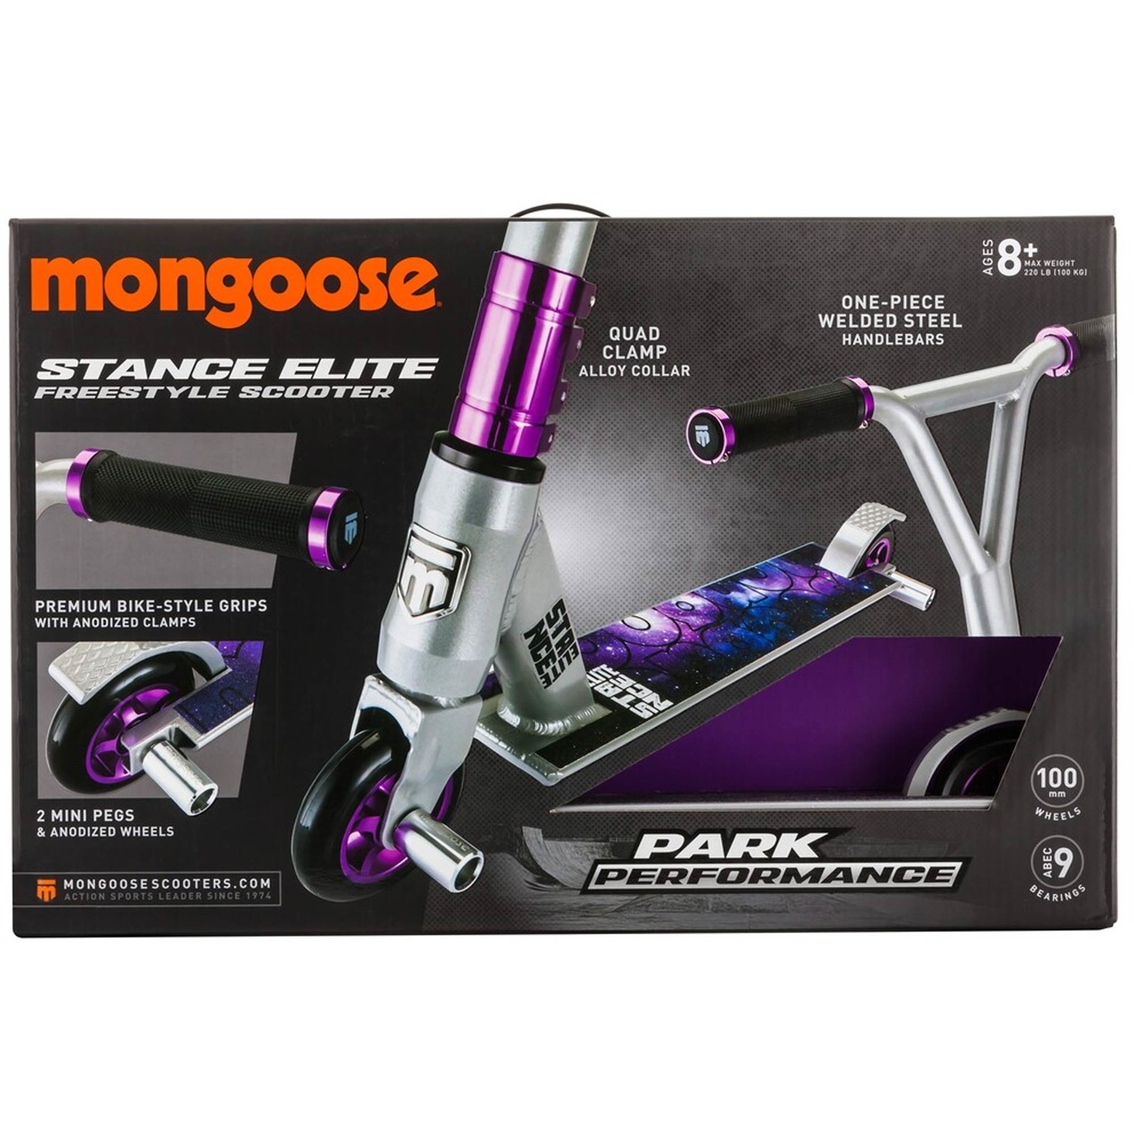 Mongoose Stance Elite Freestyle Scooter - Image 2 of 7